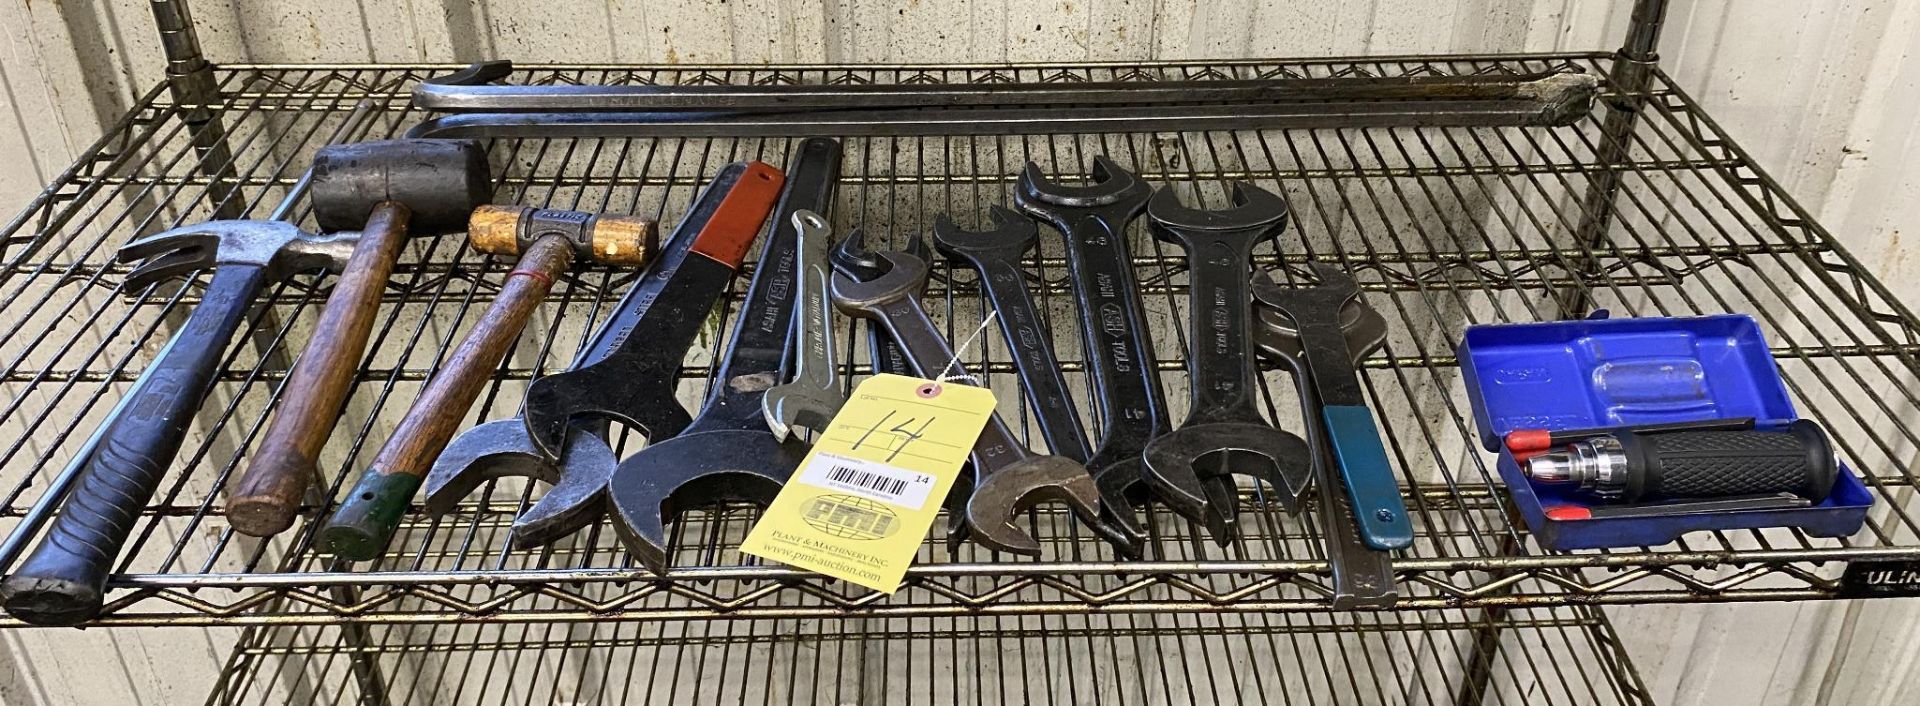 LOT CONSISTING OF: open end wrenches, hammers & pry bars